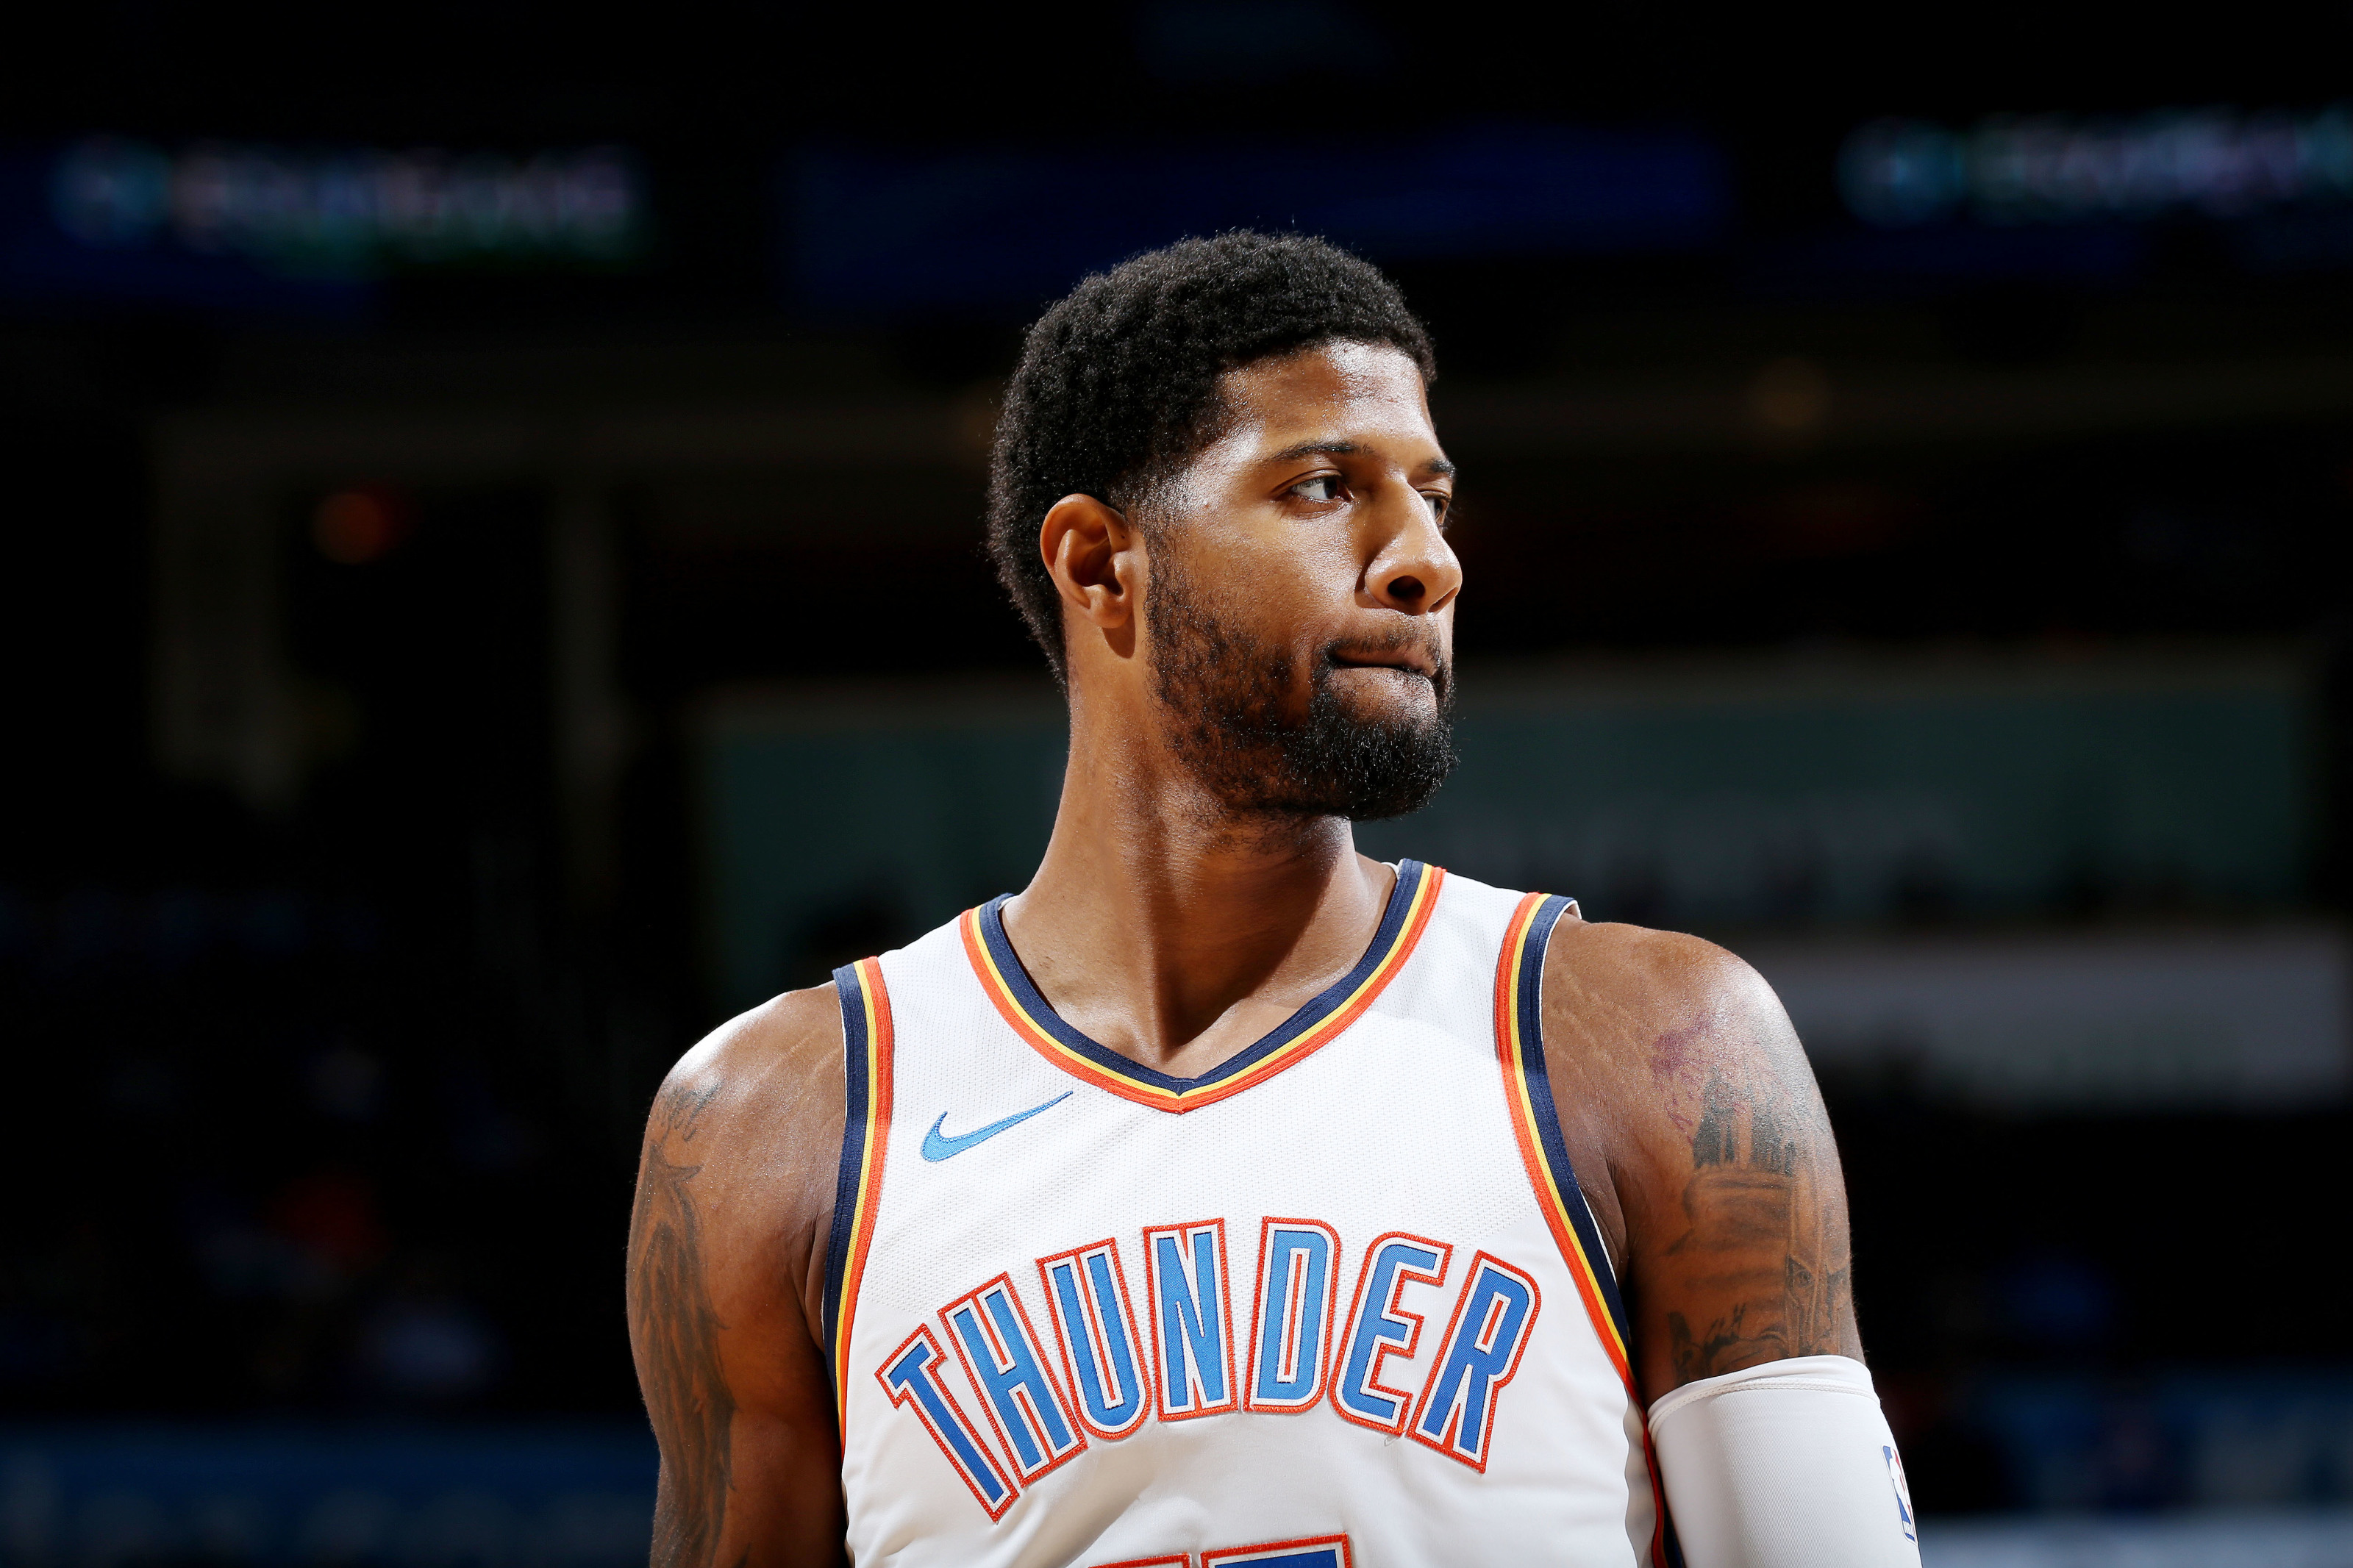 Report: Paul George commits to return to Thunder